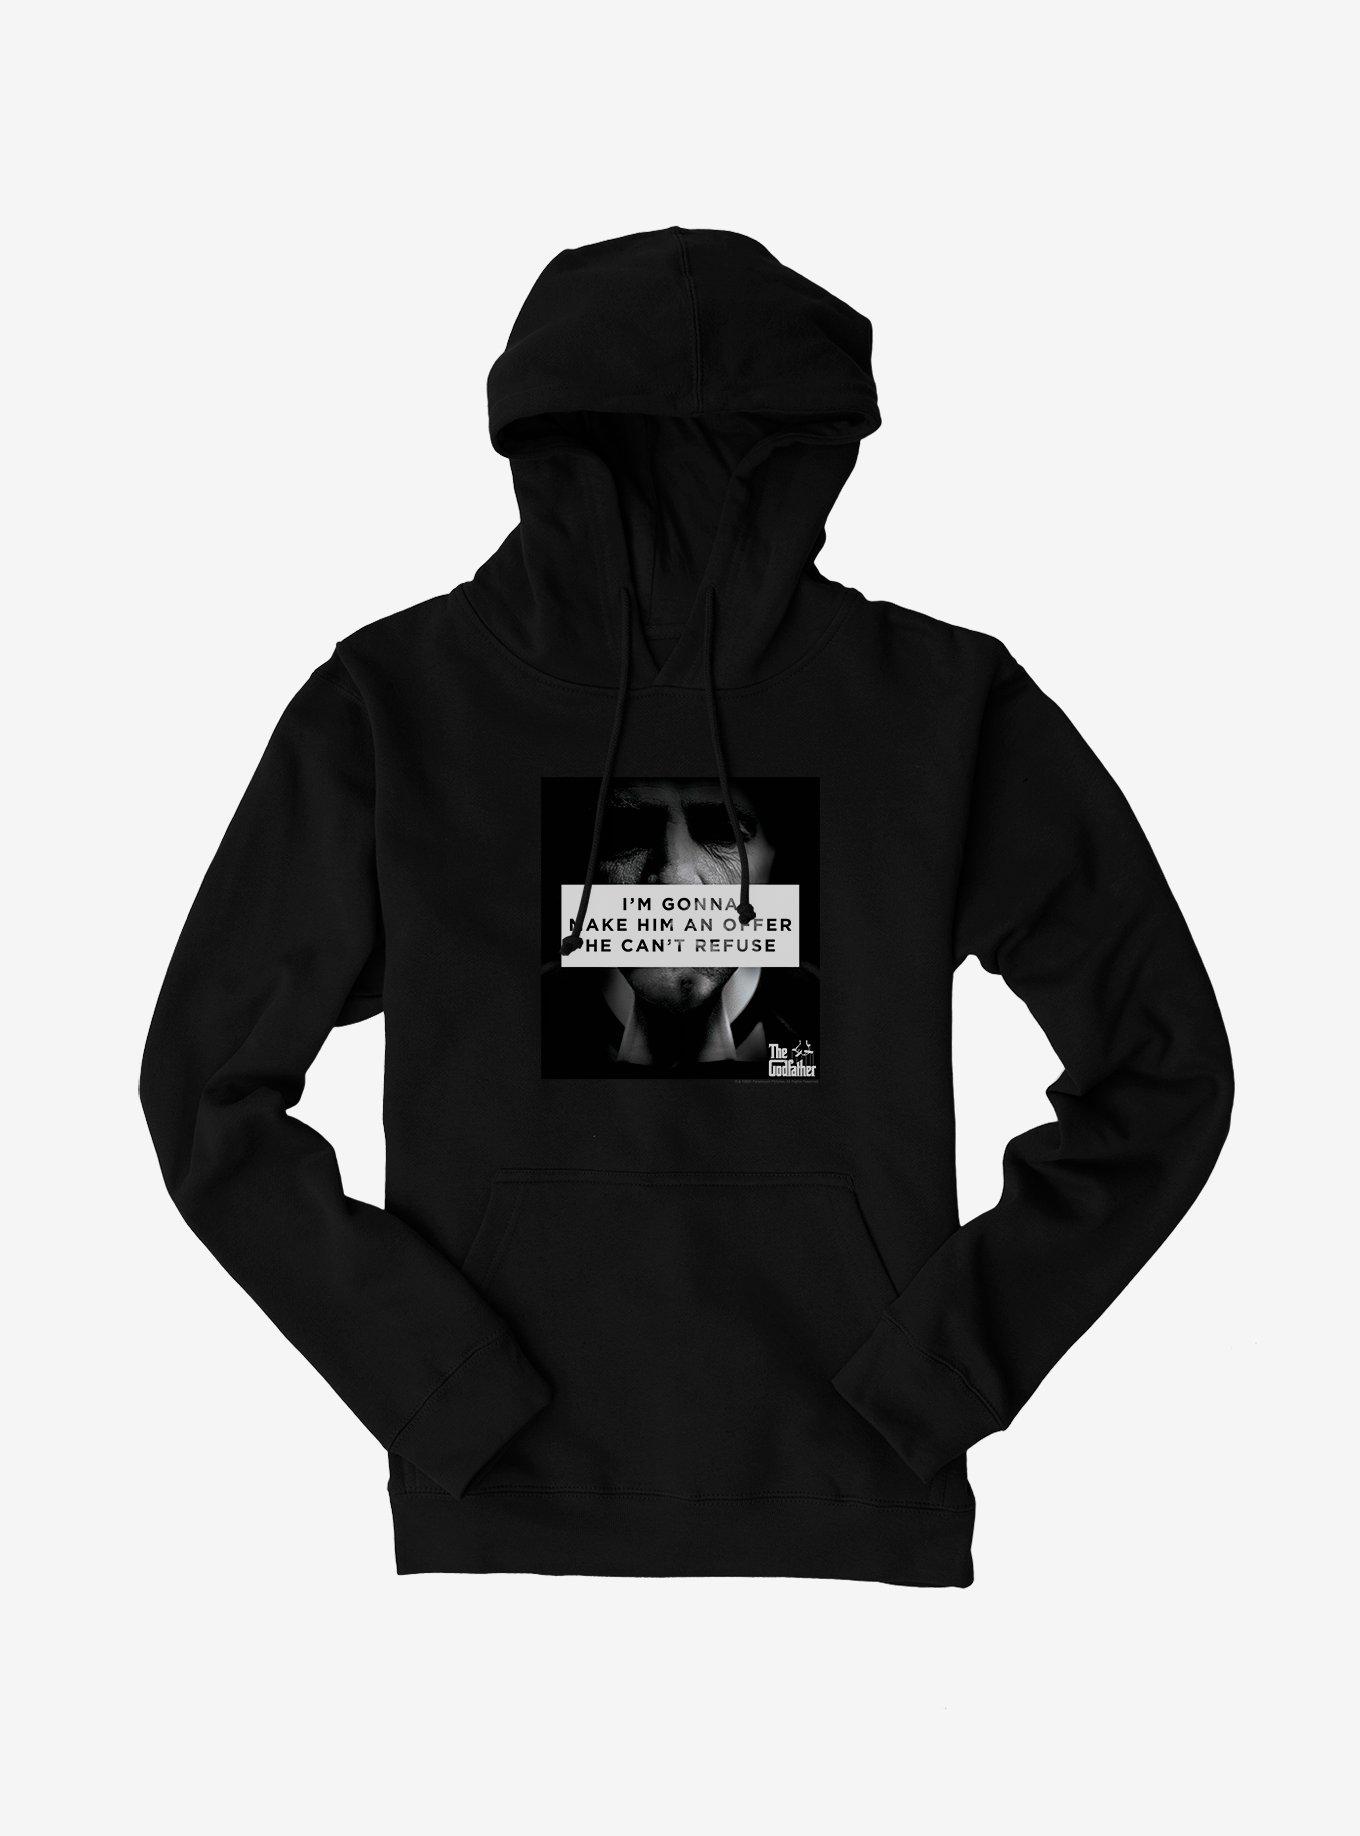 The Godfather An Offer He Can't Refuse Hoodie